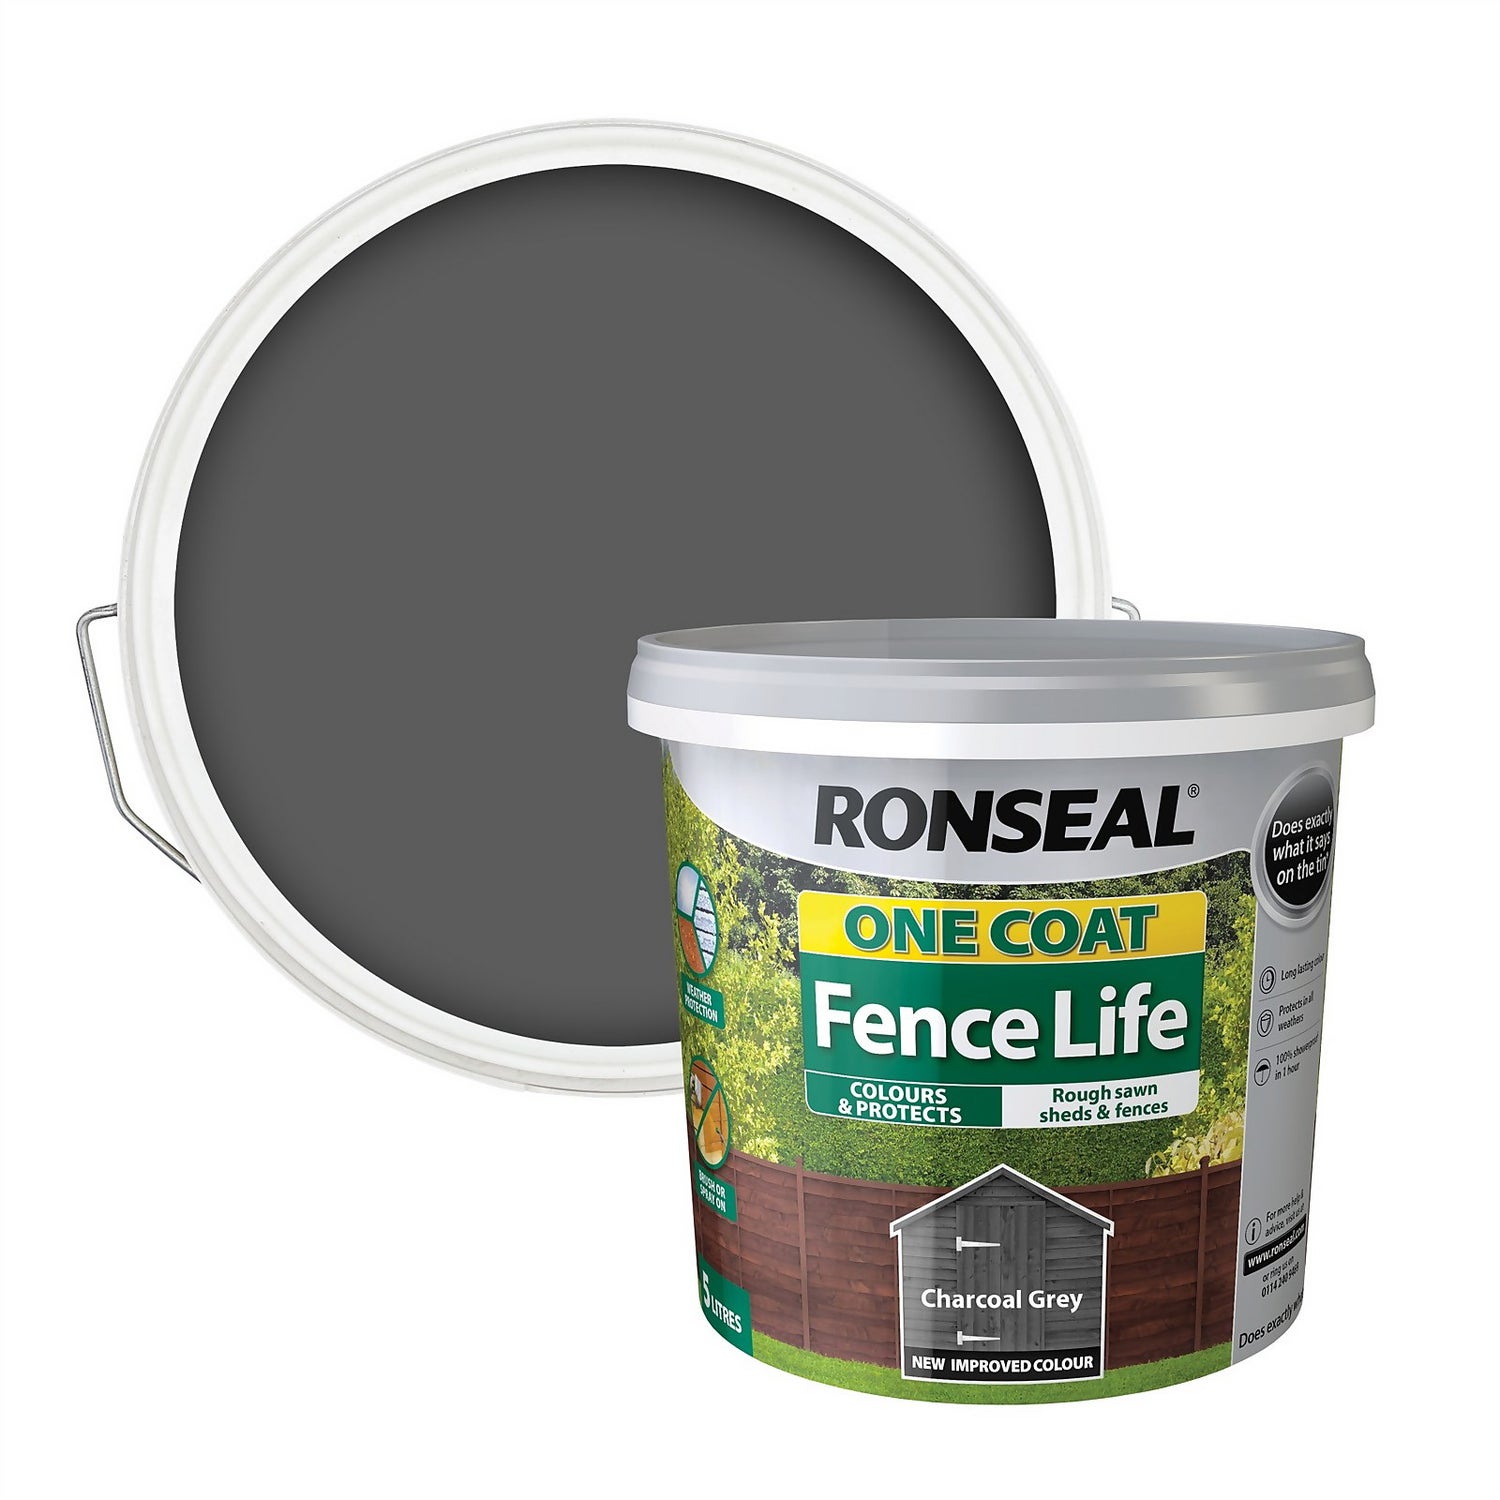 Ronseal One Coat Fence Life Charcoal